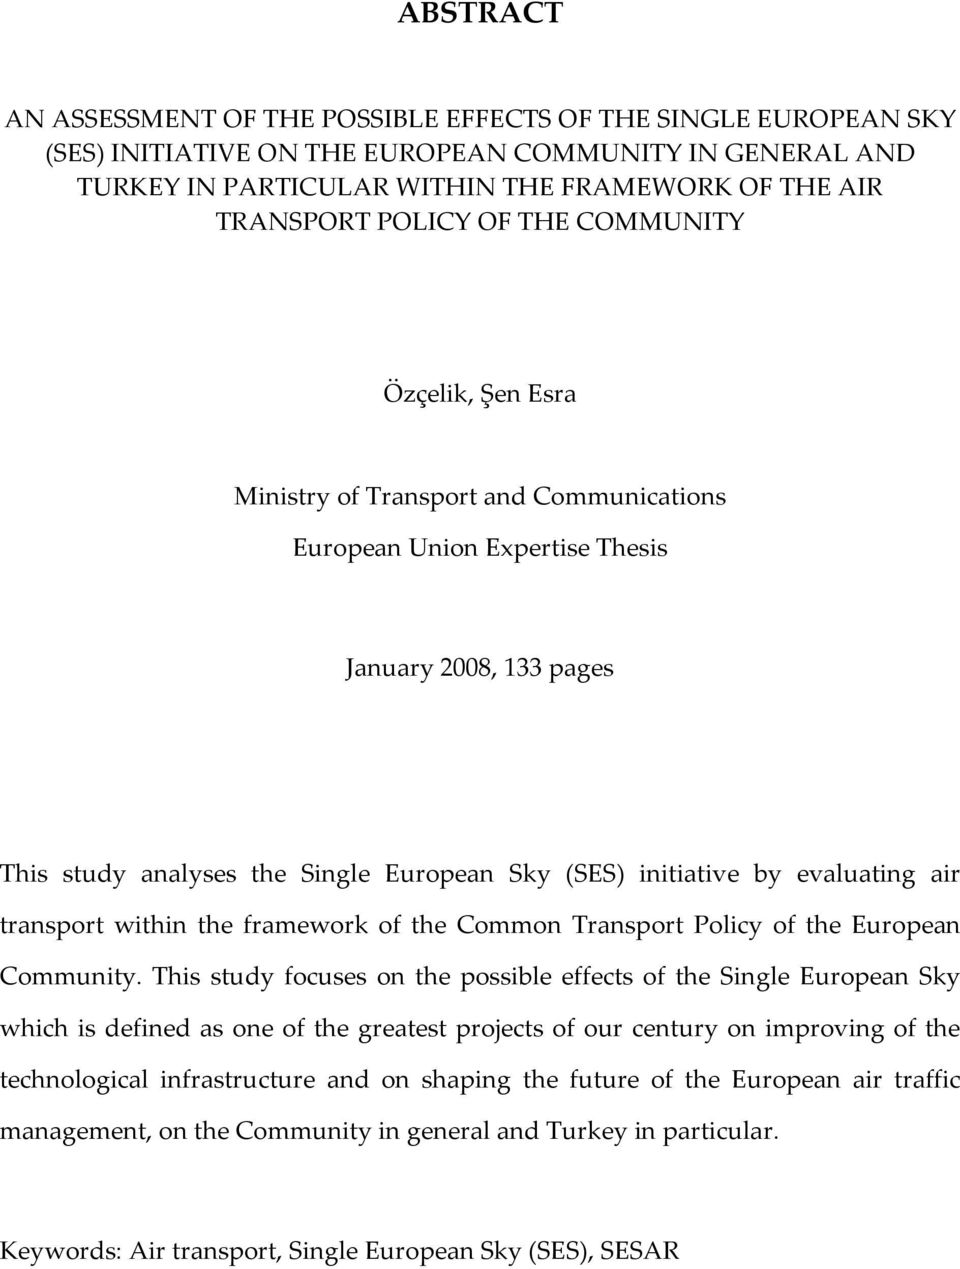 by evaluating air transport within the framework of the Common Transport Policy of the European Community.